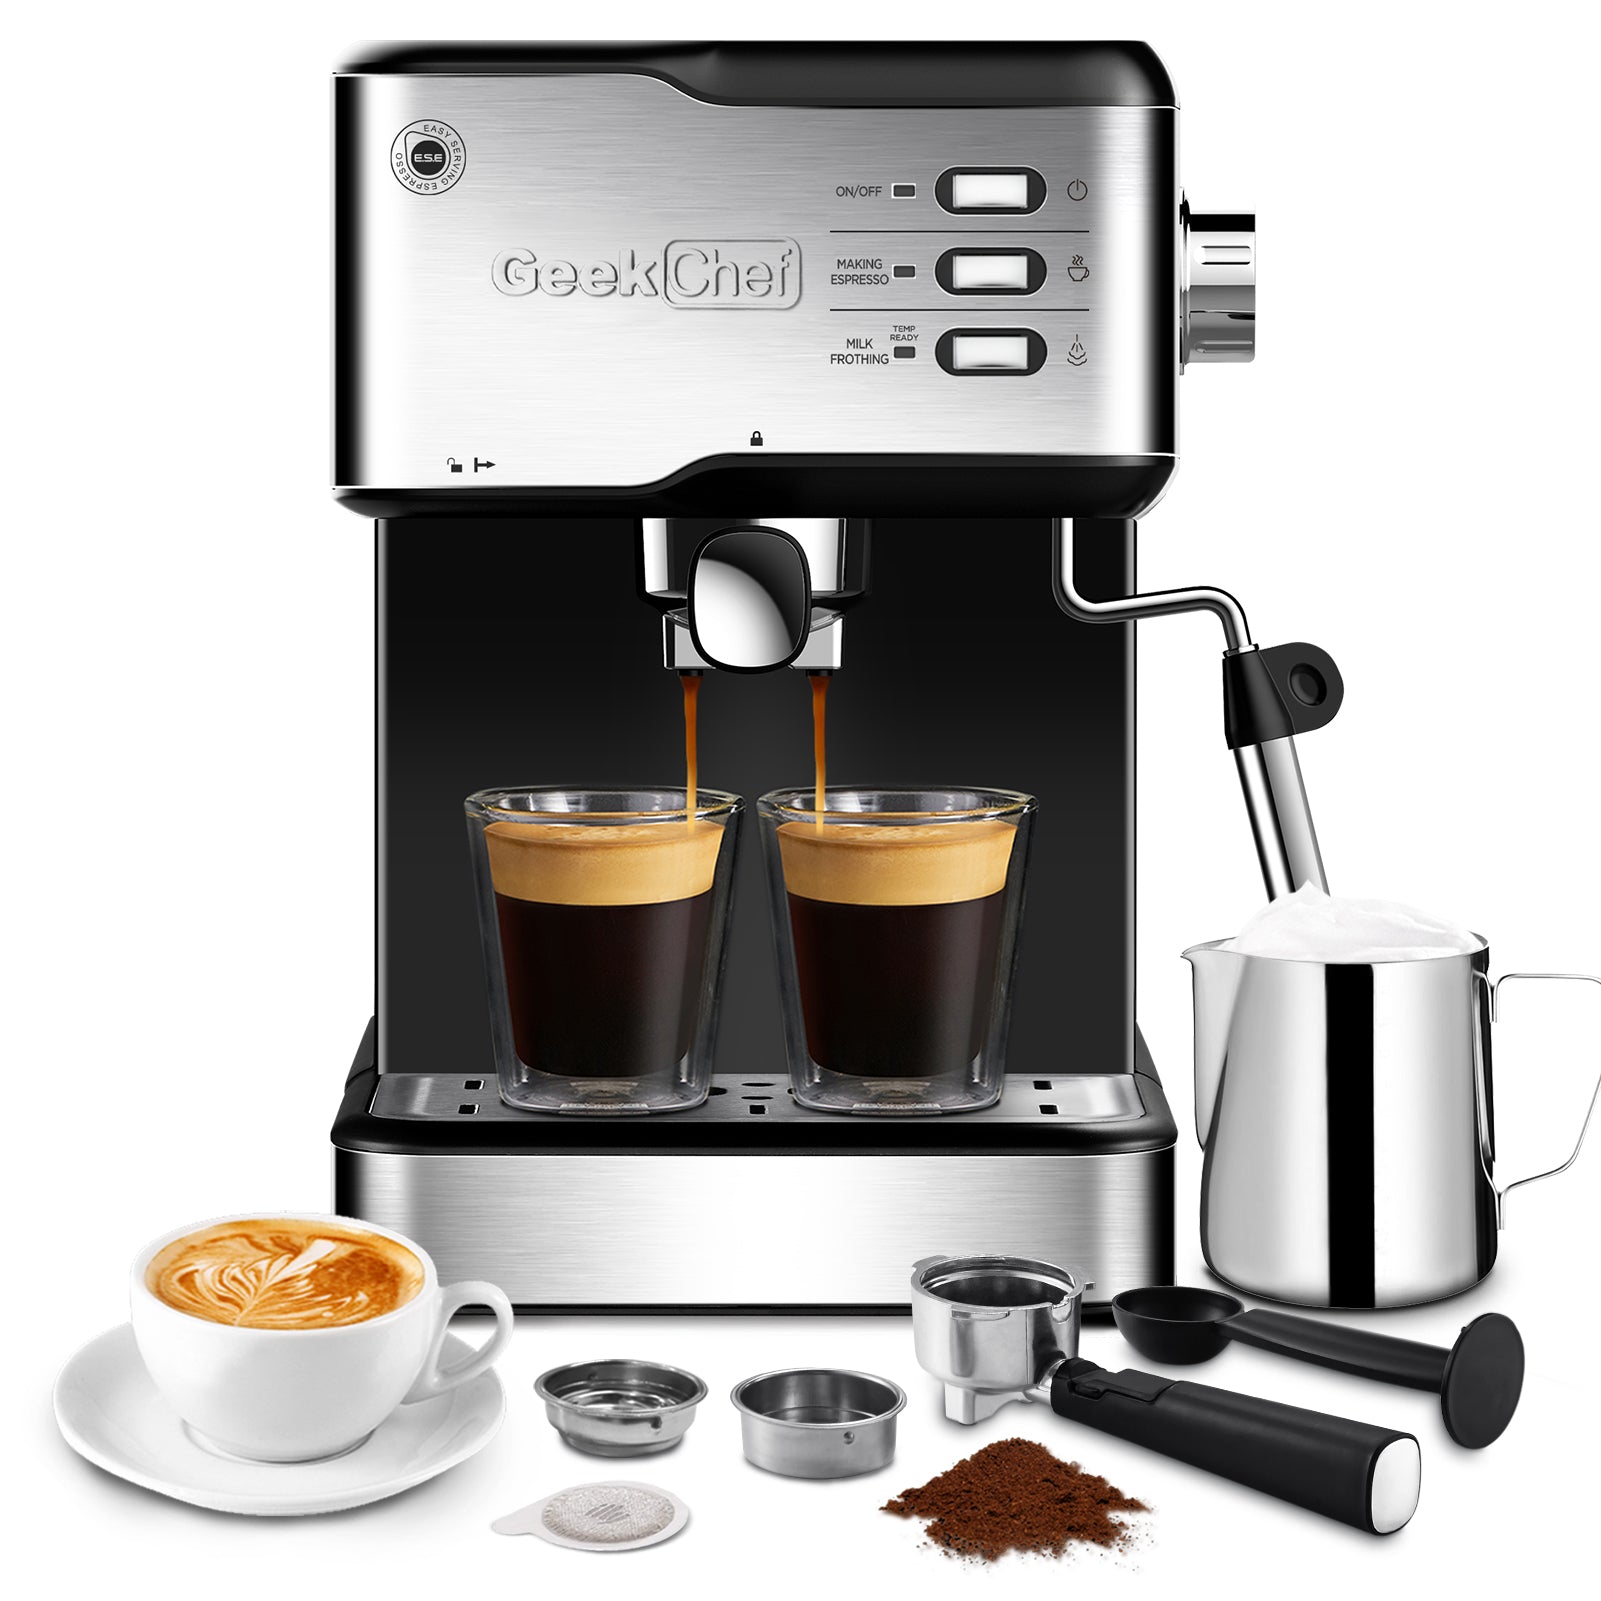 Geek Chef Espresso Machine, Espresso&Cappuccino Latte Maker 20 Bar Coffee Machine Compatible With ESE POD Capsules Filter&Milk Frother Steam Wand, 950W, 1.5L Water Tank,Ban On Amazon